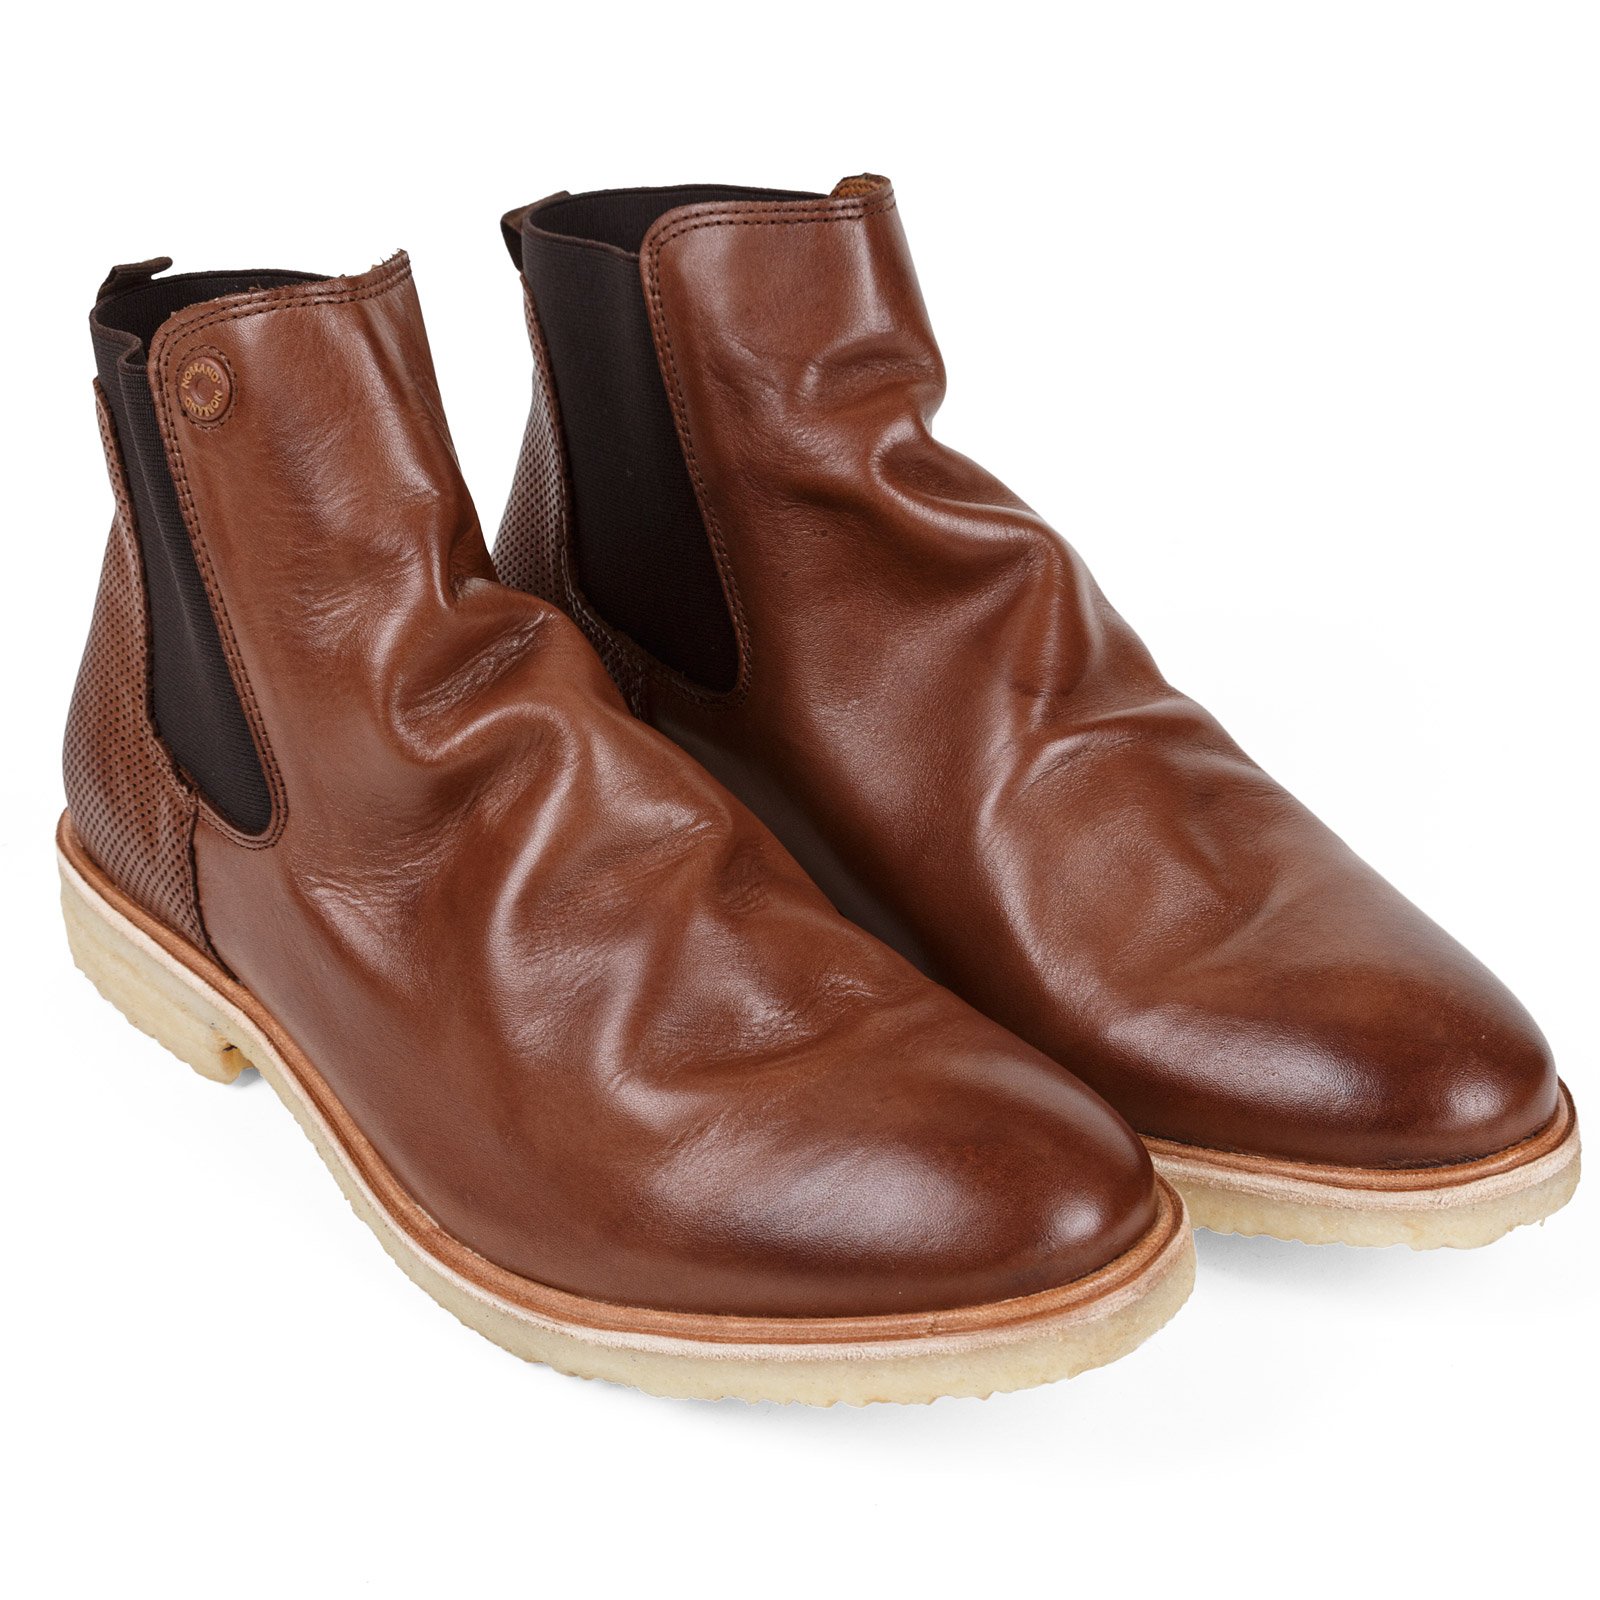 Dillon Creased Leather Chelsea Boot - Shoes & Boots-Casual Shoes : FA2 Online Outlet Store - NO BRAND